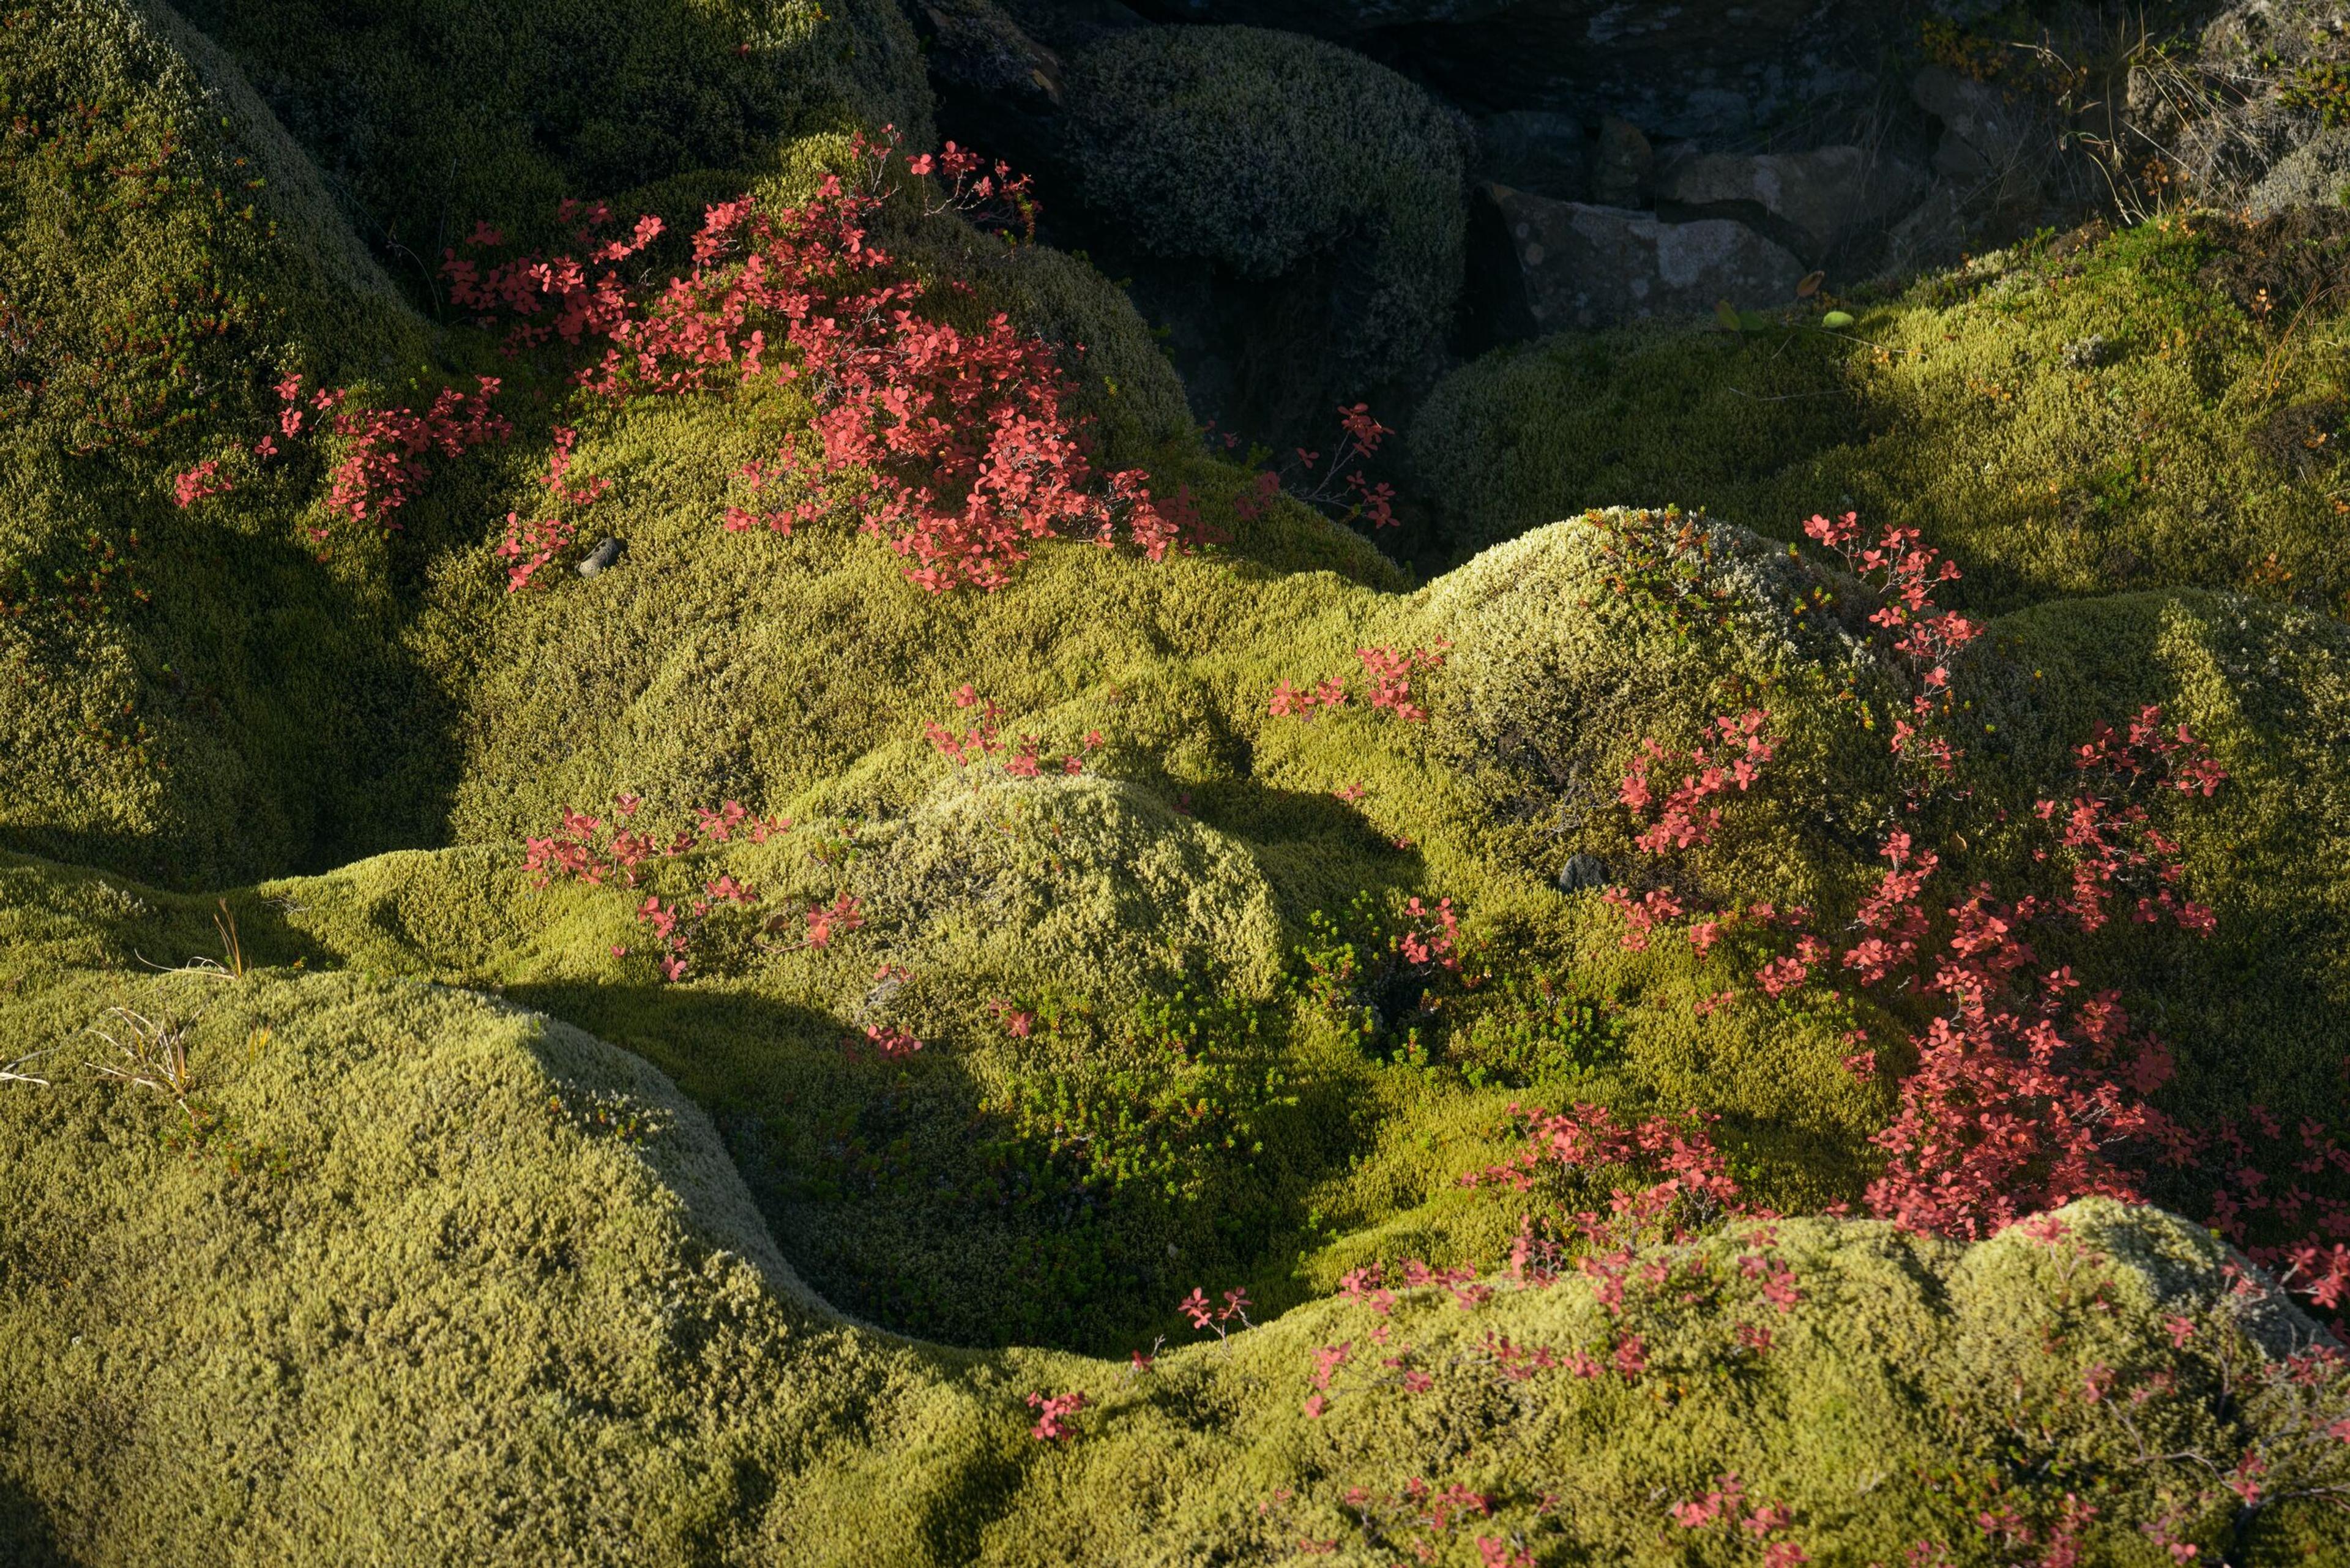 Moss-covered rocks interspersed with bright pink wildflowers basking in the sunlight.